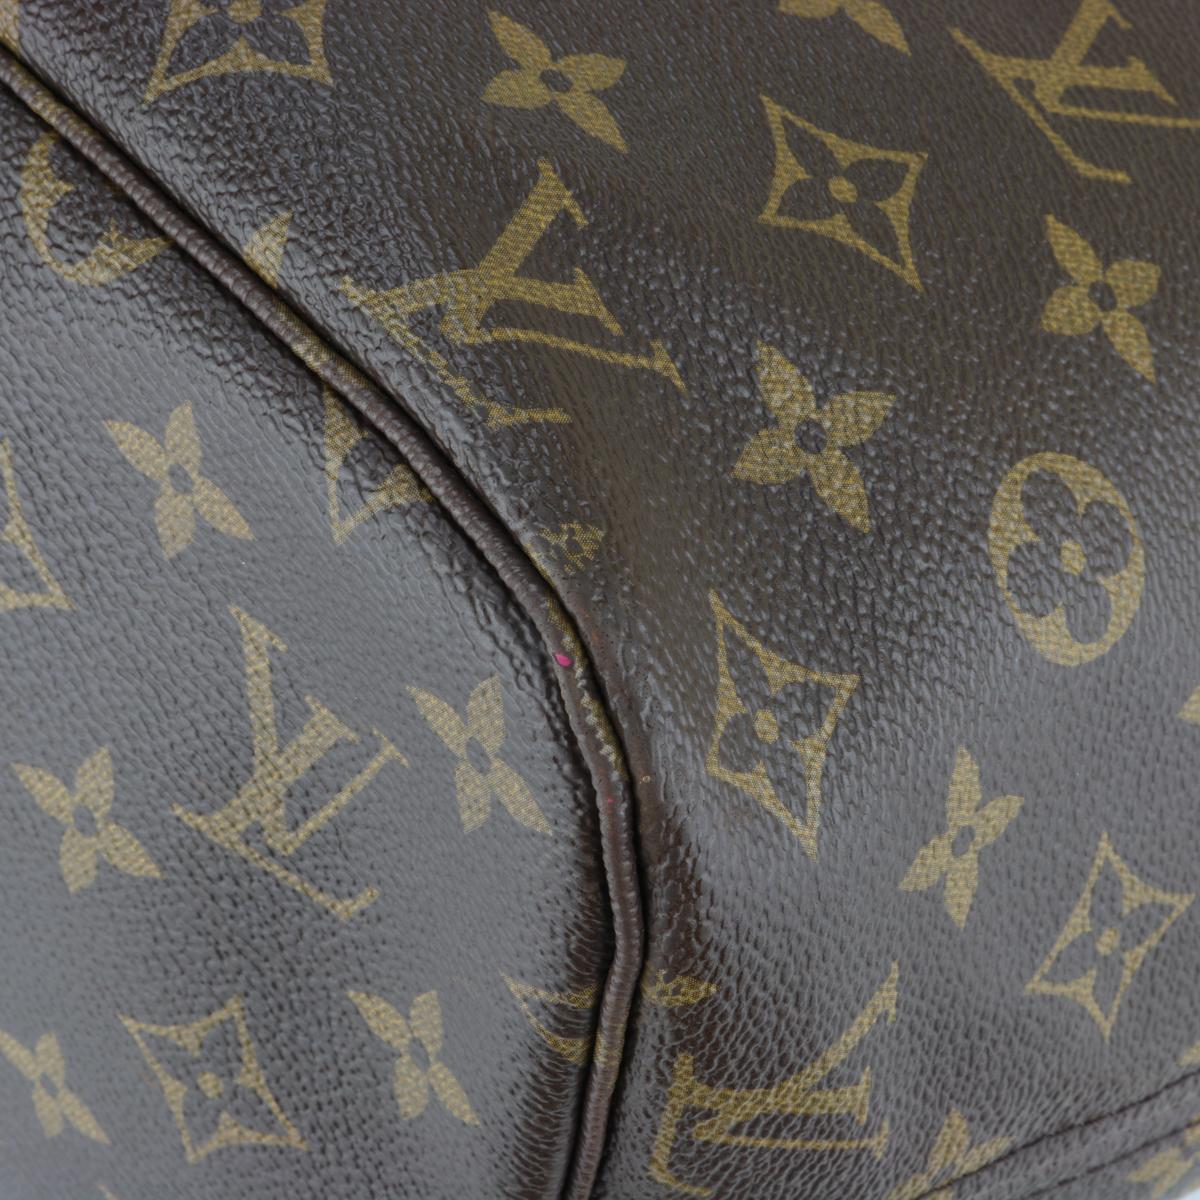 Louis Vuitton Neverfull MM Bag in Monogram with Beige Interior 2017 For Sale 3